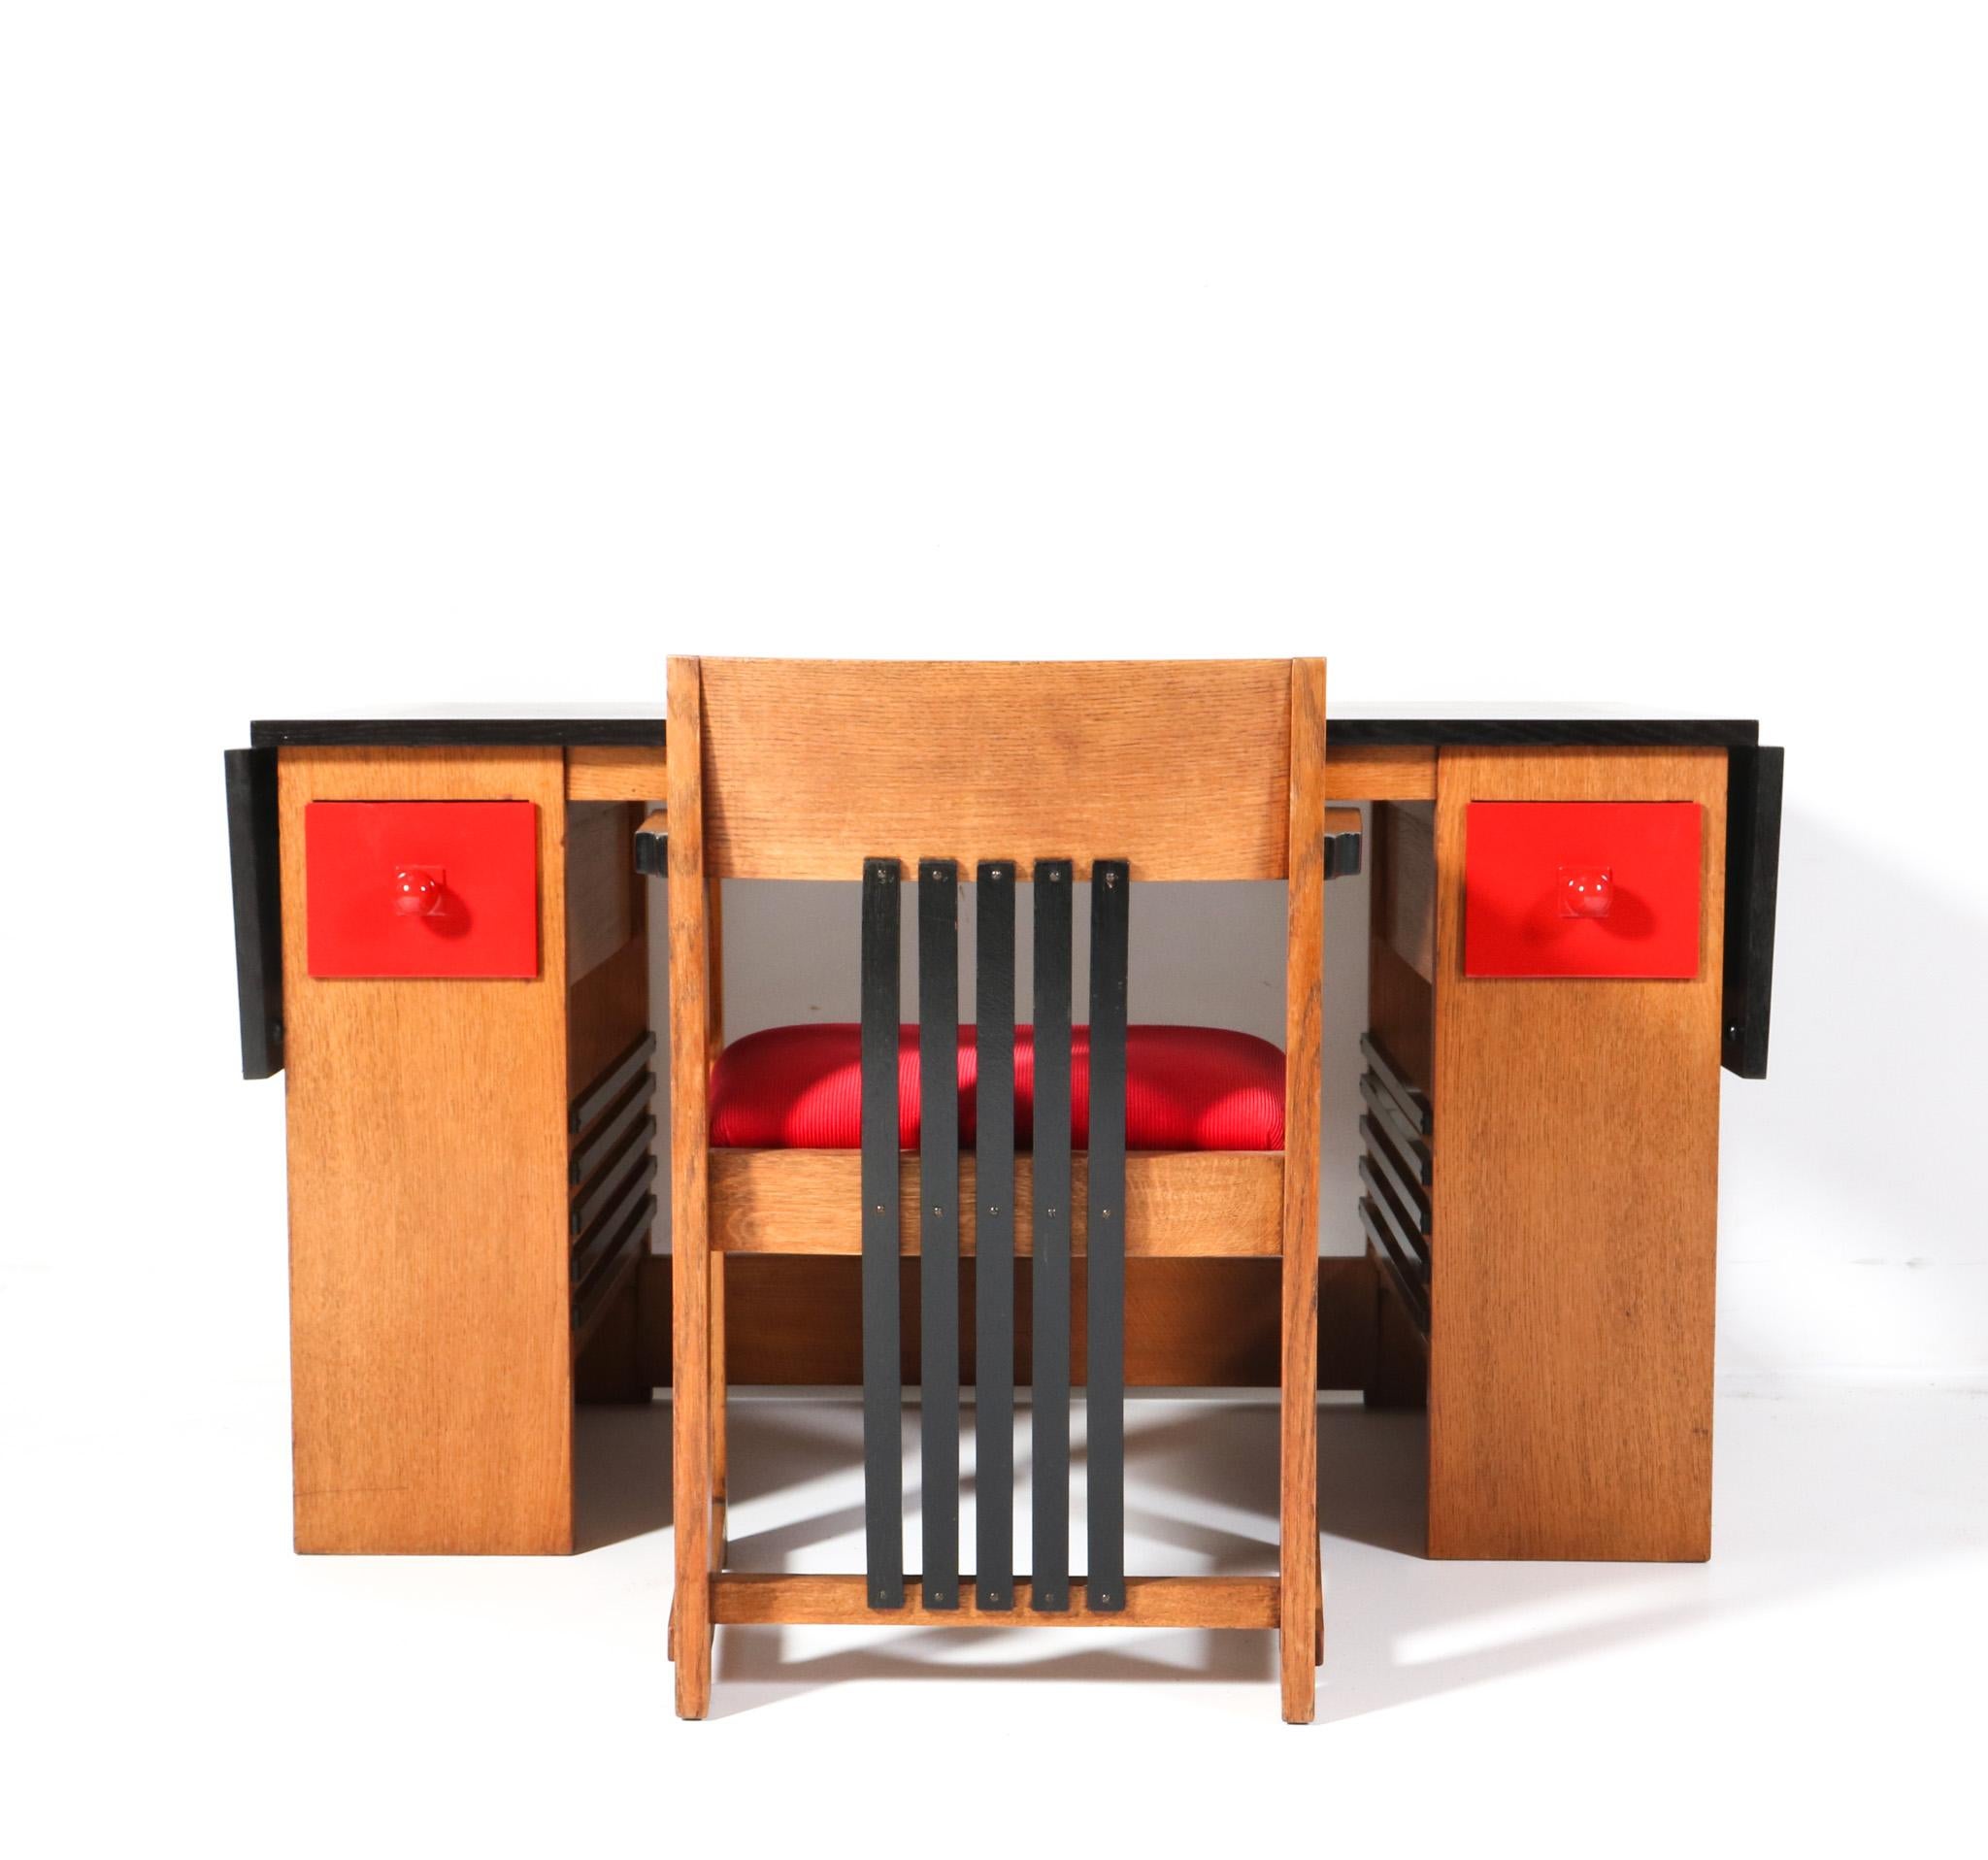  Art Deco Modernist Armchair by Hendrik Wouda for Pander, 1920s For Sale 2